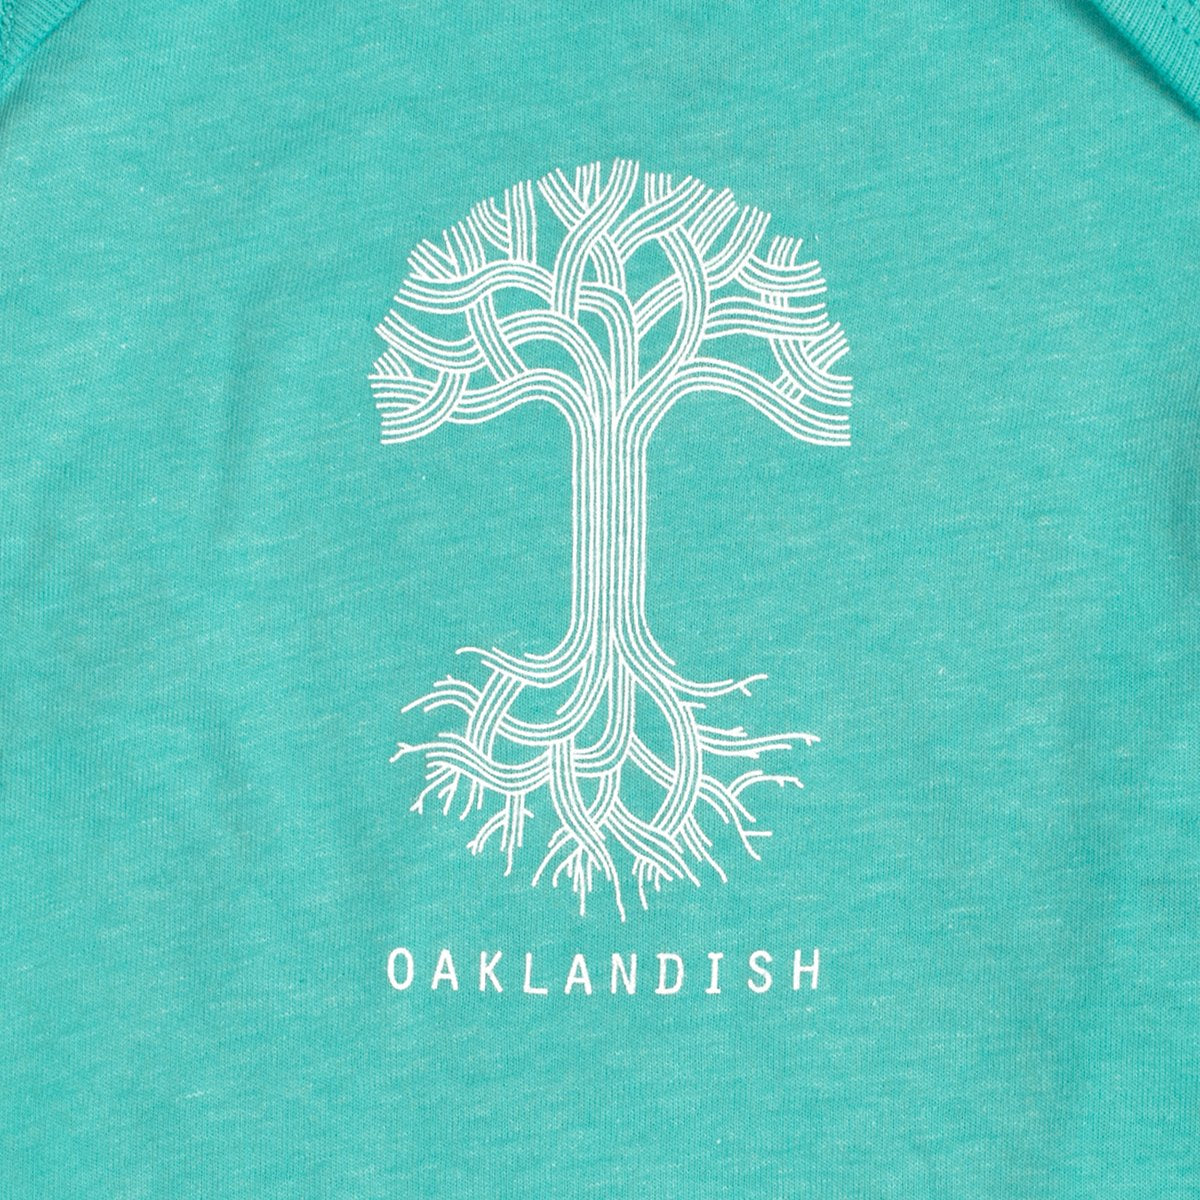 Close-up of the white Oaklandish tree logo and wordmark on an emerald green infant one-piece.